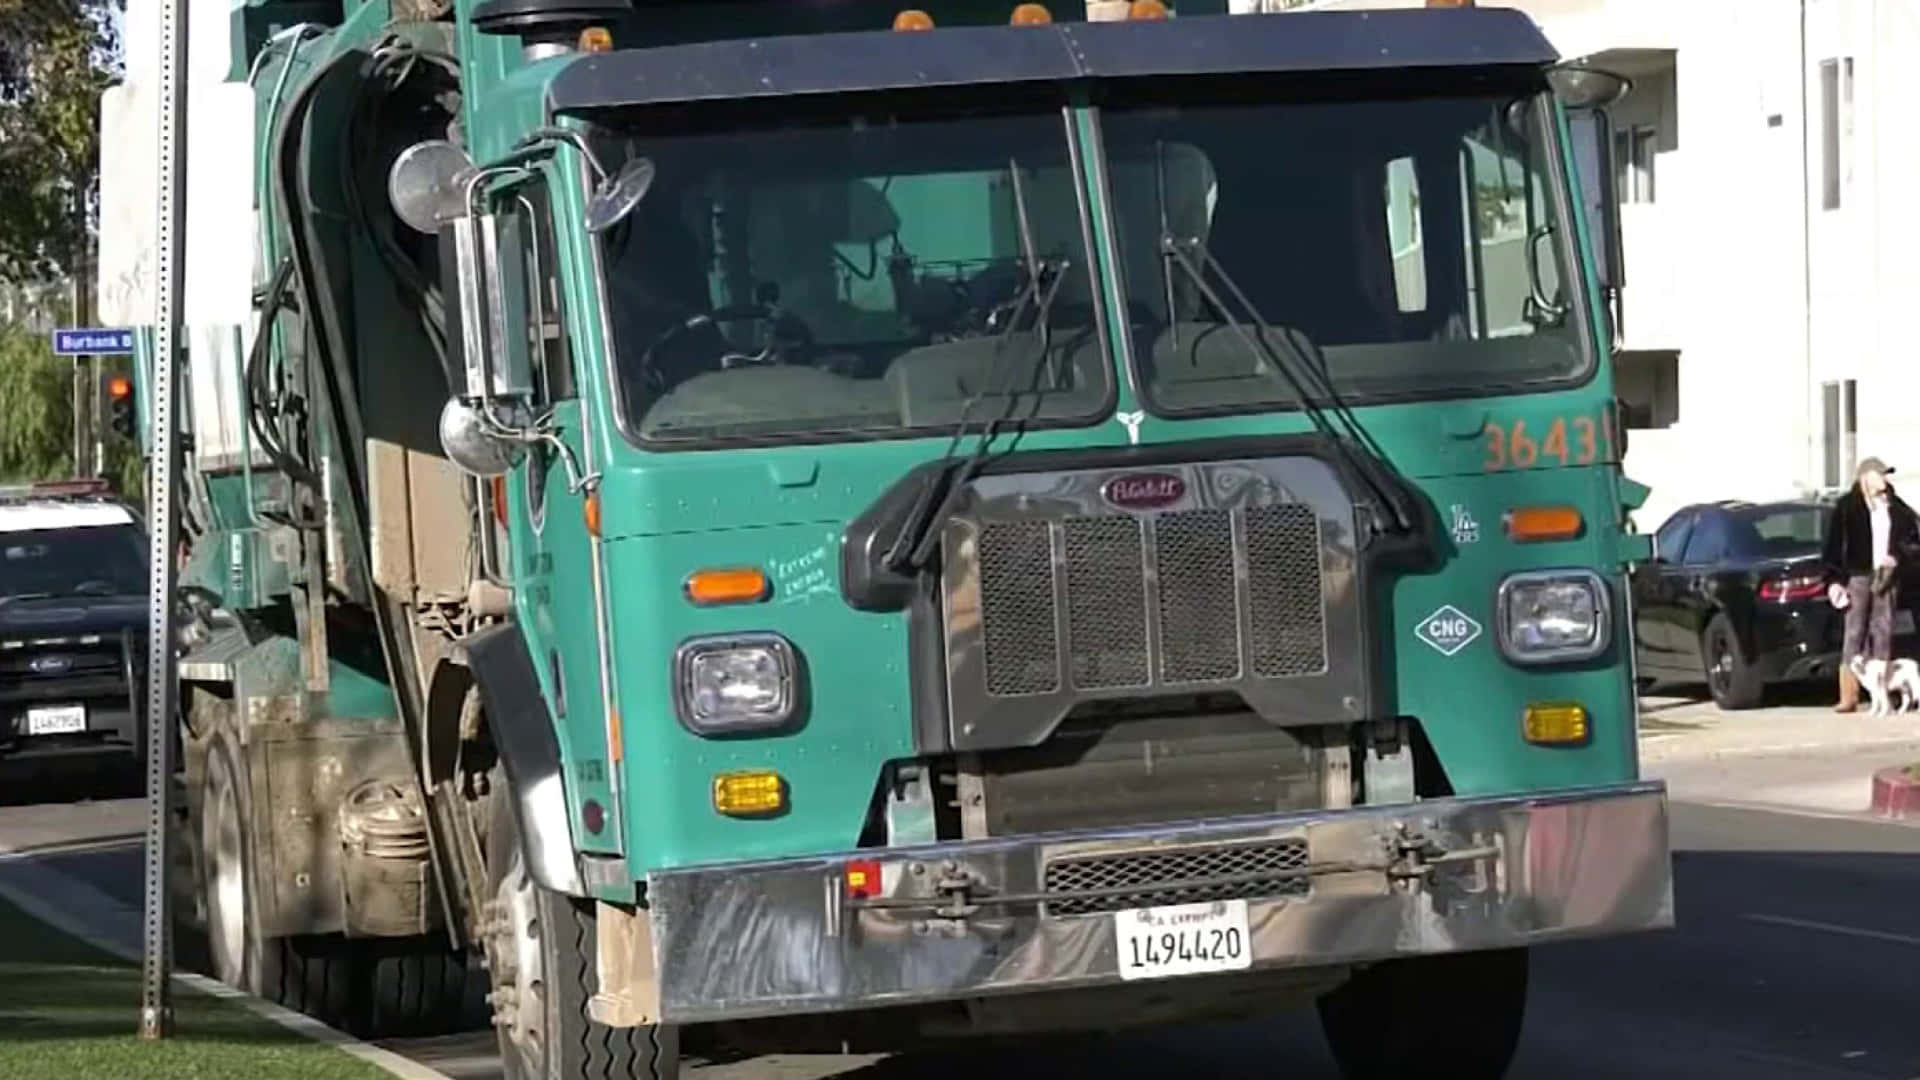 A recycling garbage truck — doing its part for the environment!